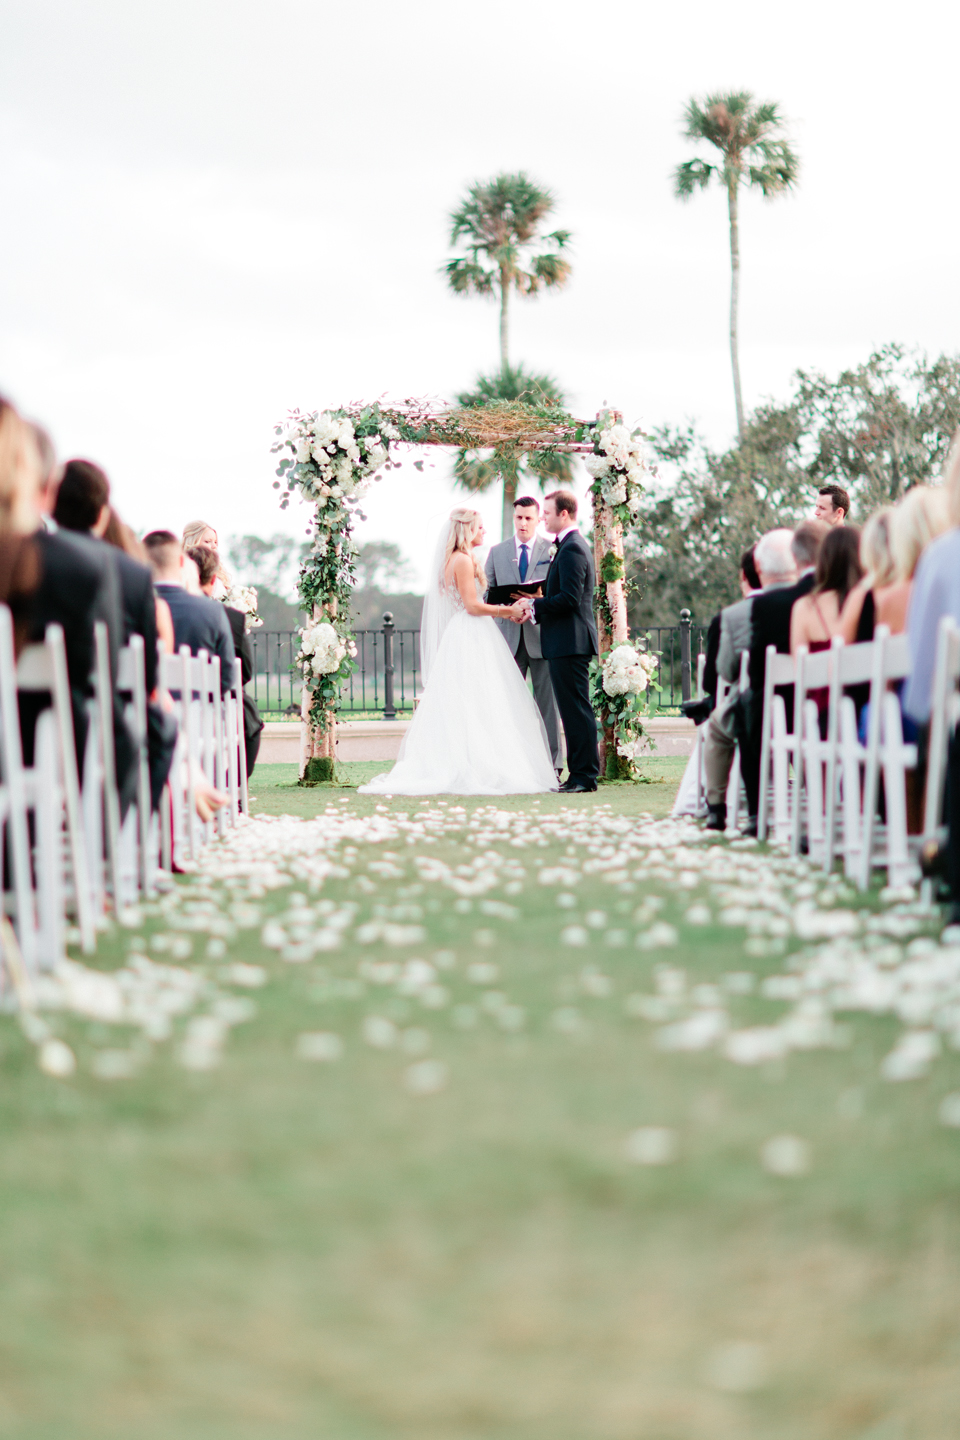 Picture of a bride and groom saying vows on a wedding day at TPC Sawgrass in Ponte Vedra, Florida